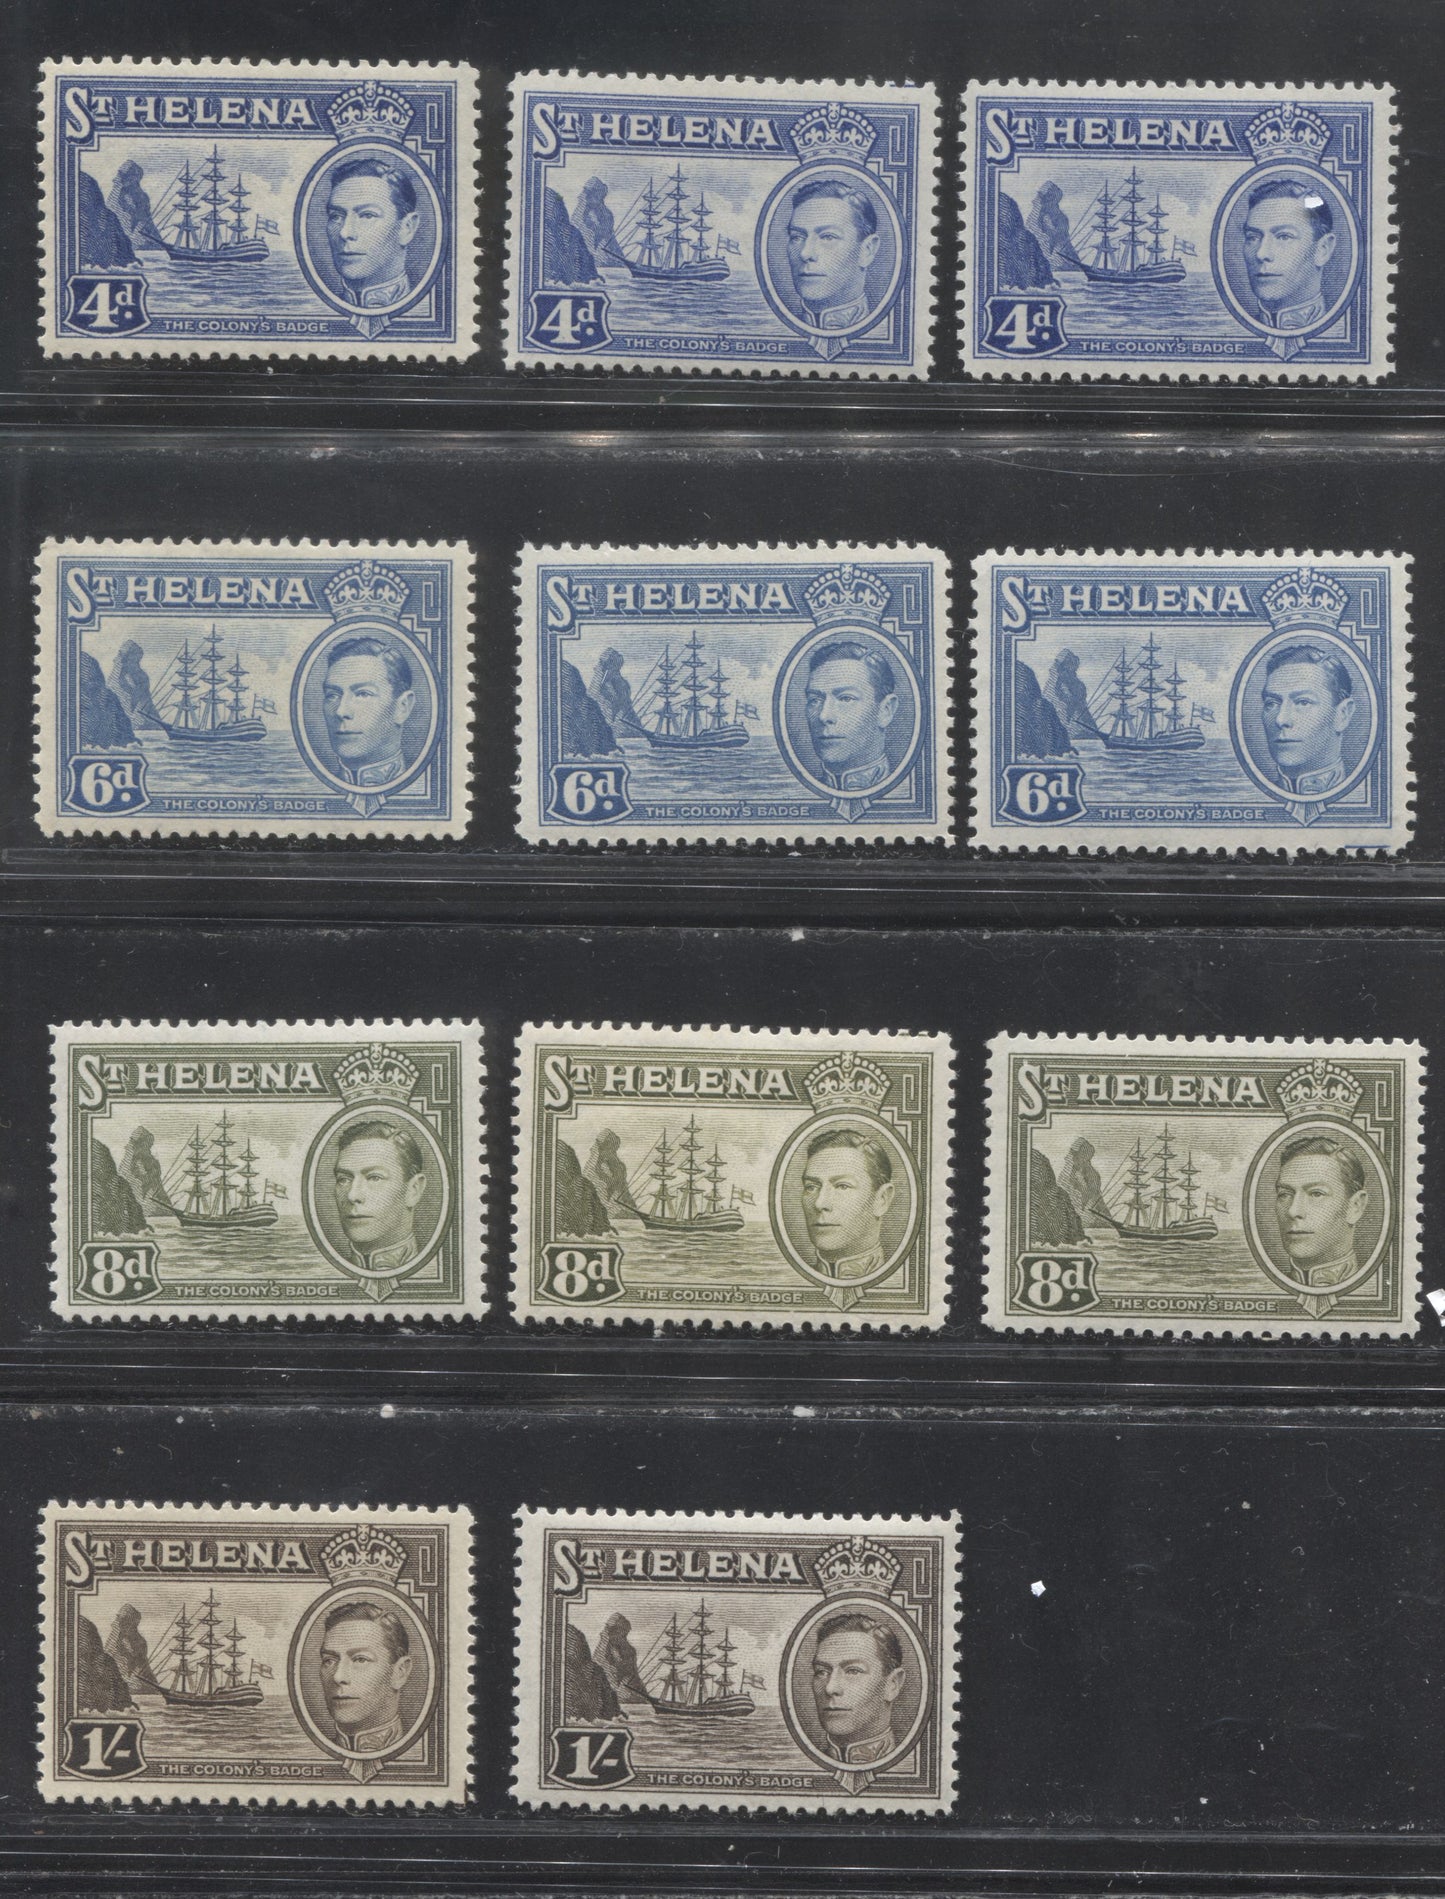 St. Helena SG#135b-137 4d Ultramarine - 1/- Sepia, 1938-1949 Colonial Badge Definitive Issue, A Specialized Group of Mostly VFOG Stamps With Different Printings of Most Values